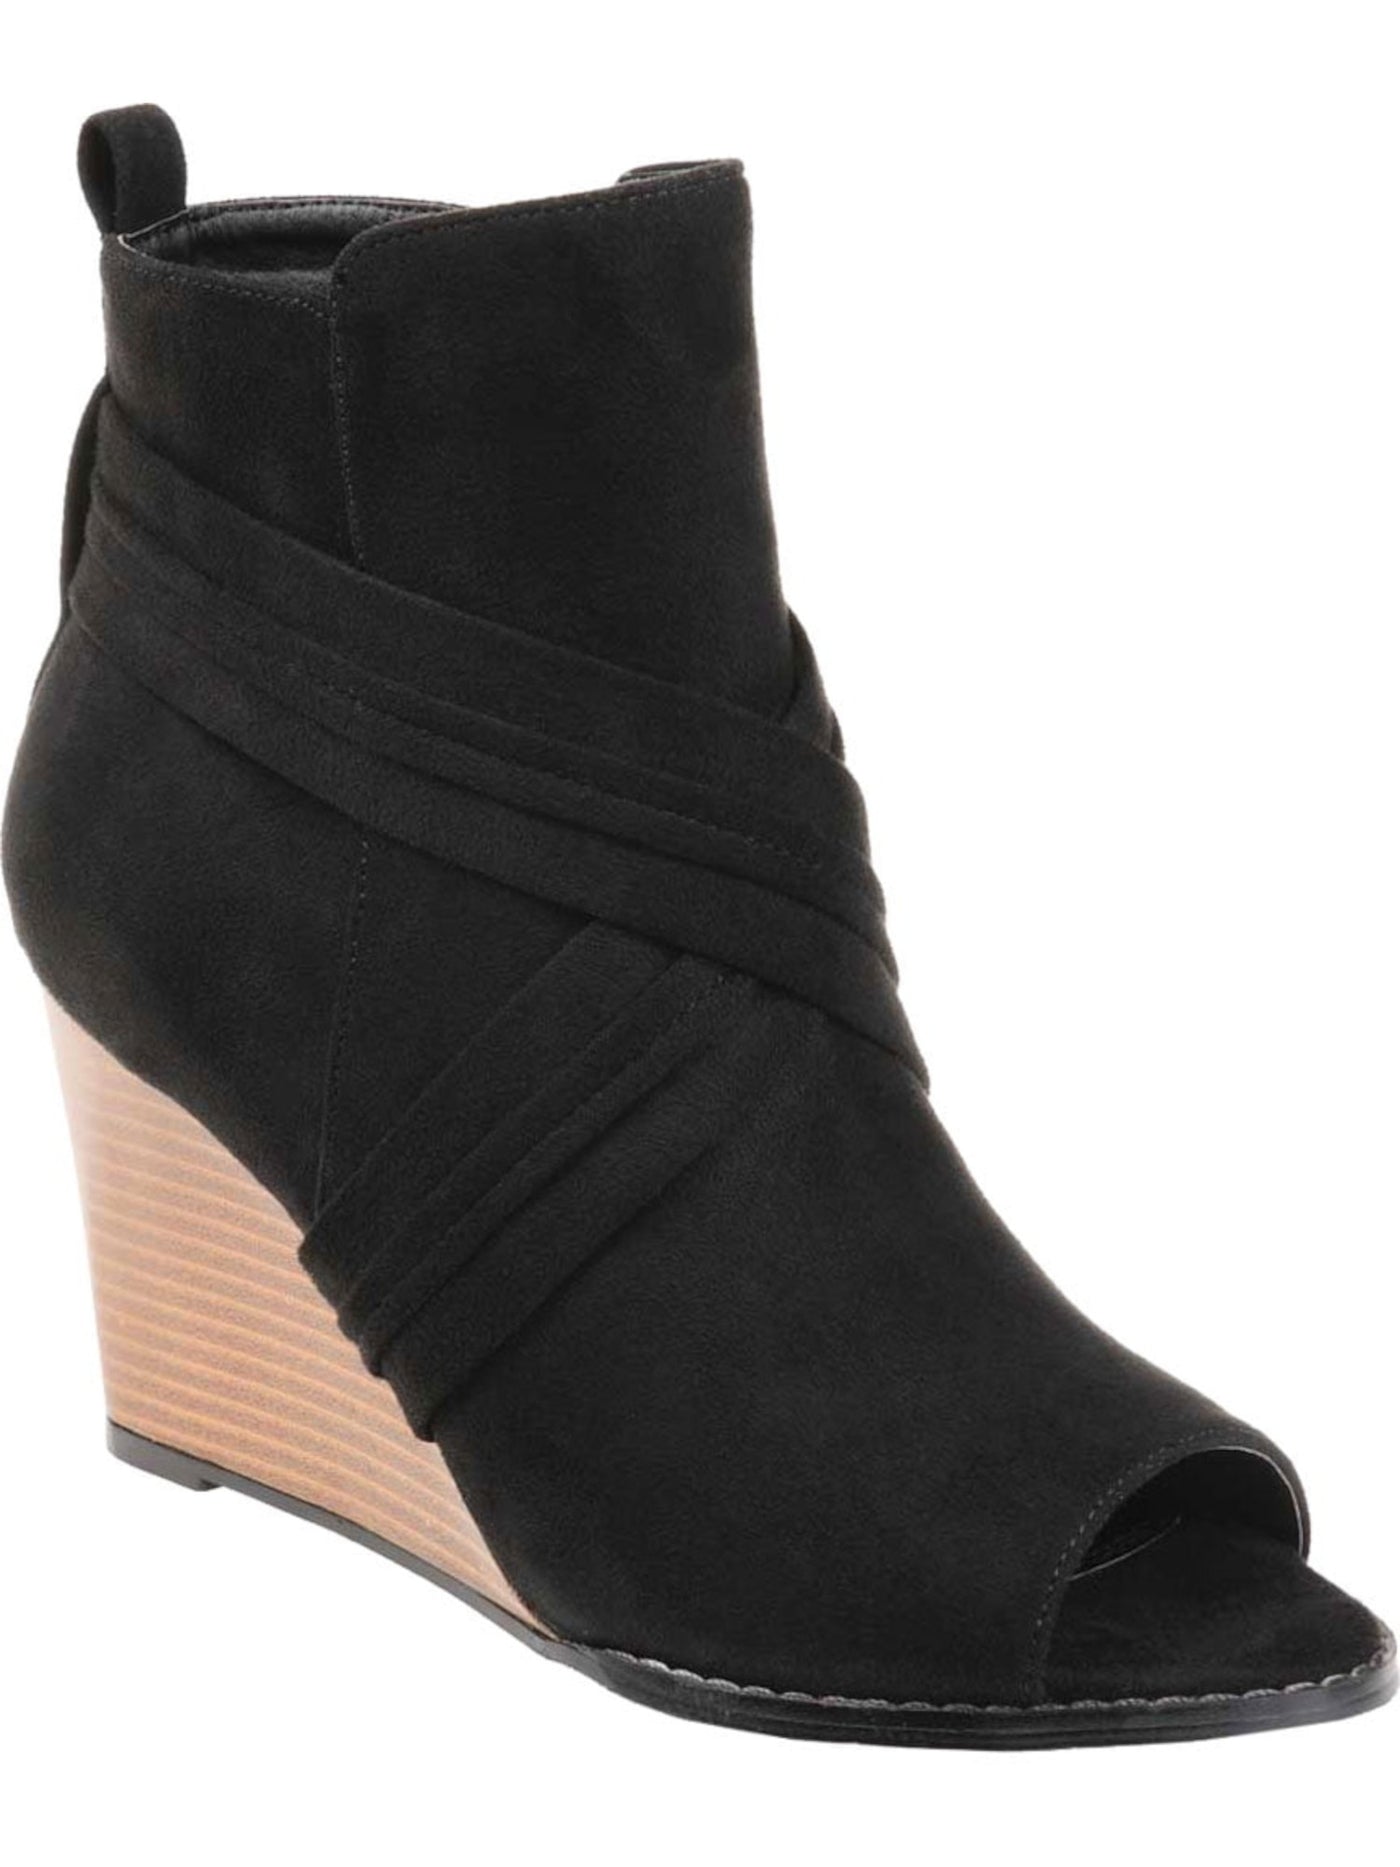 JOURNEE COLLECTION Womens Black Padded Strappy Sabeena Open Toe Wedge Zip-Up Booties 8.5 M